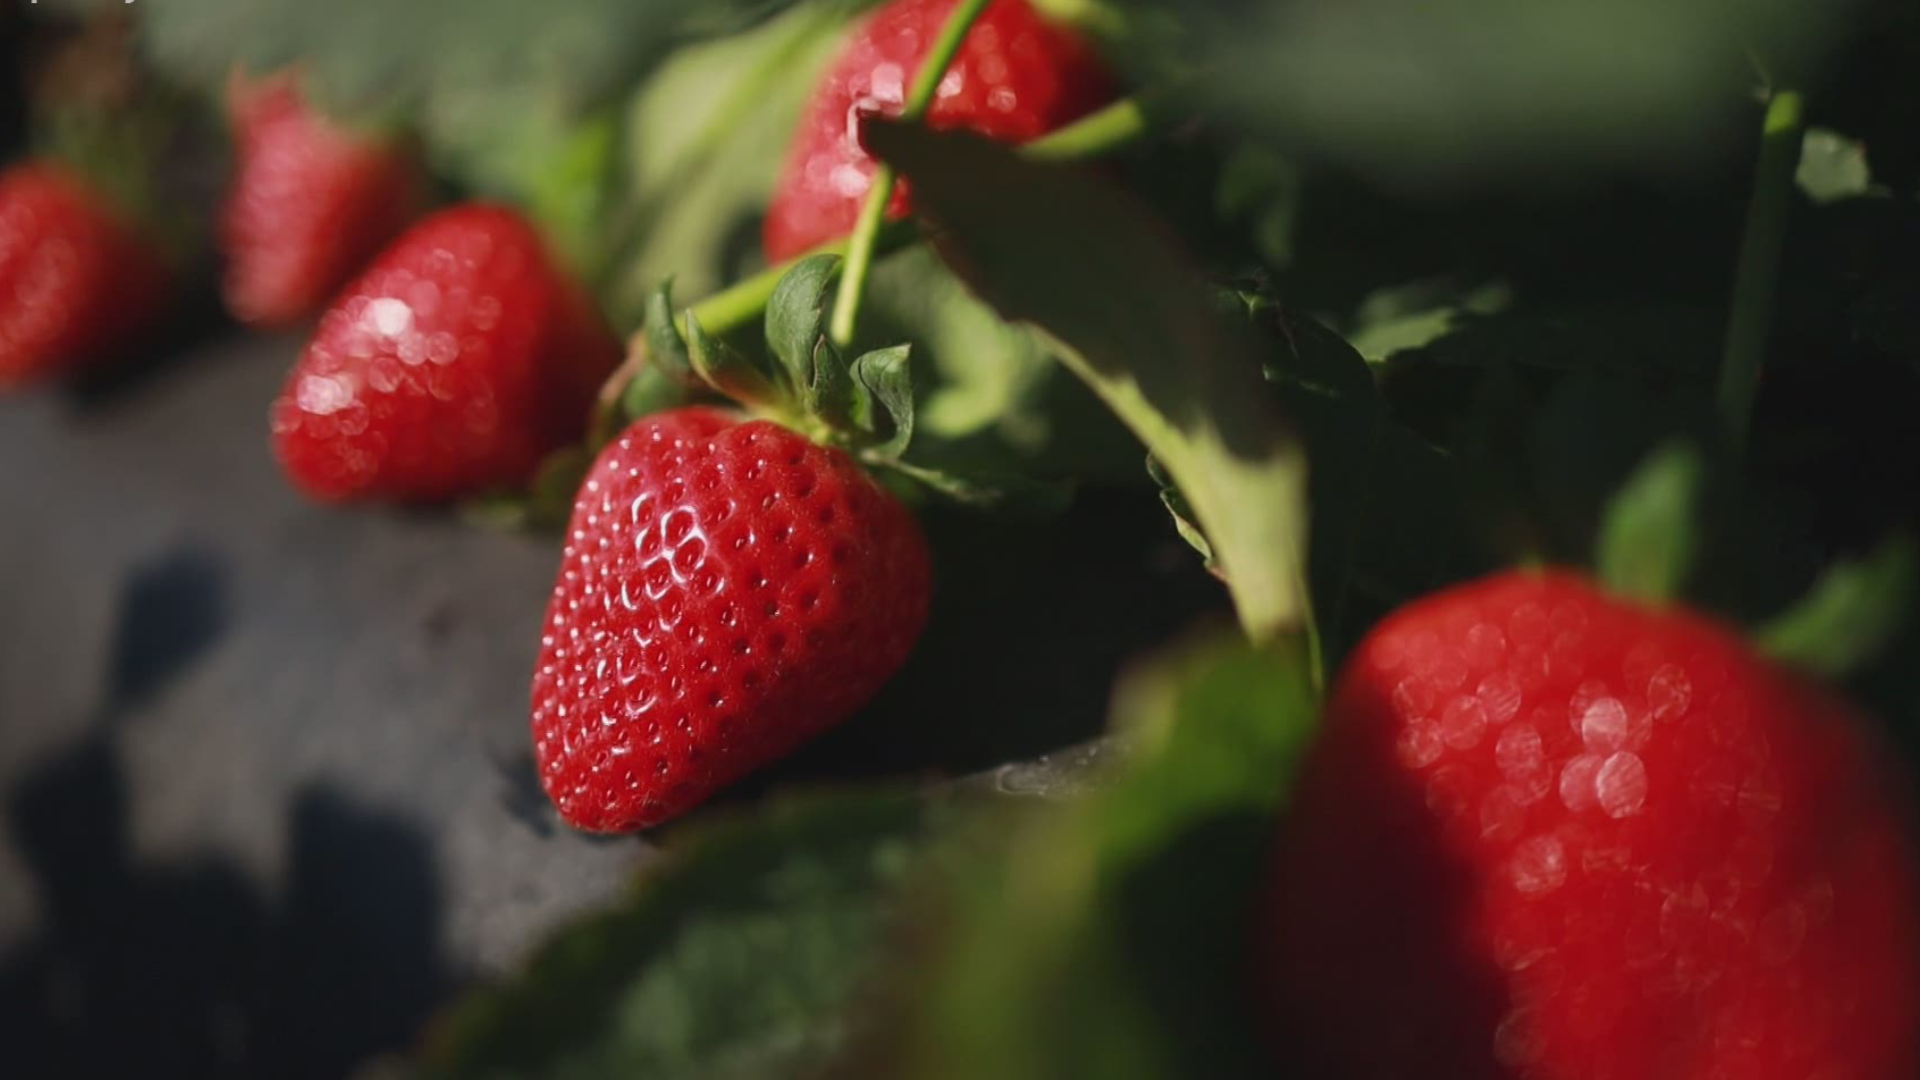 The Florida Strawberry Festival in Plant City brings the farmers back to their roots and they can showcase their flavorful fruits.